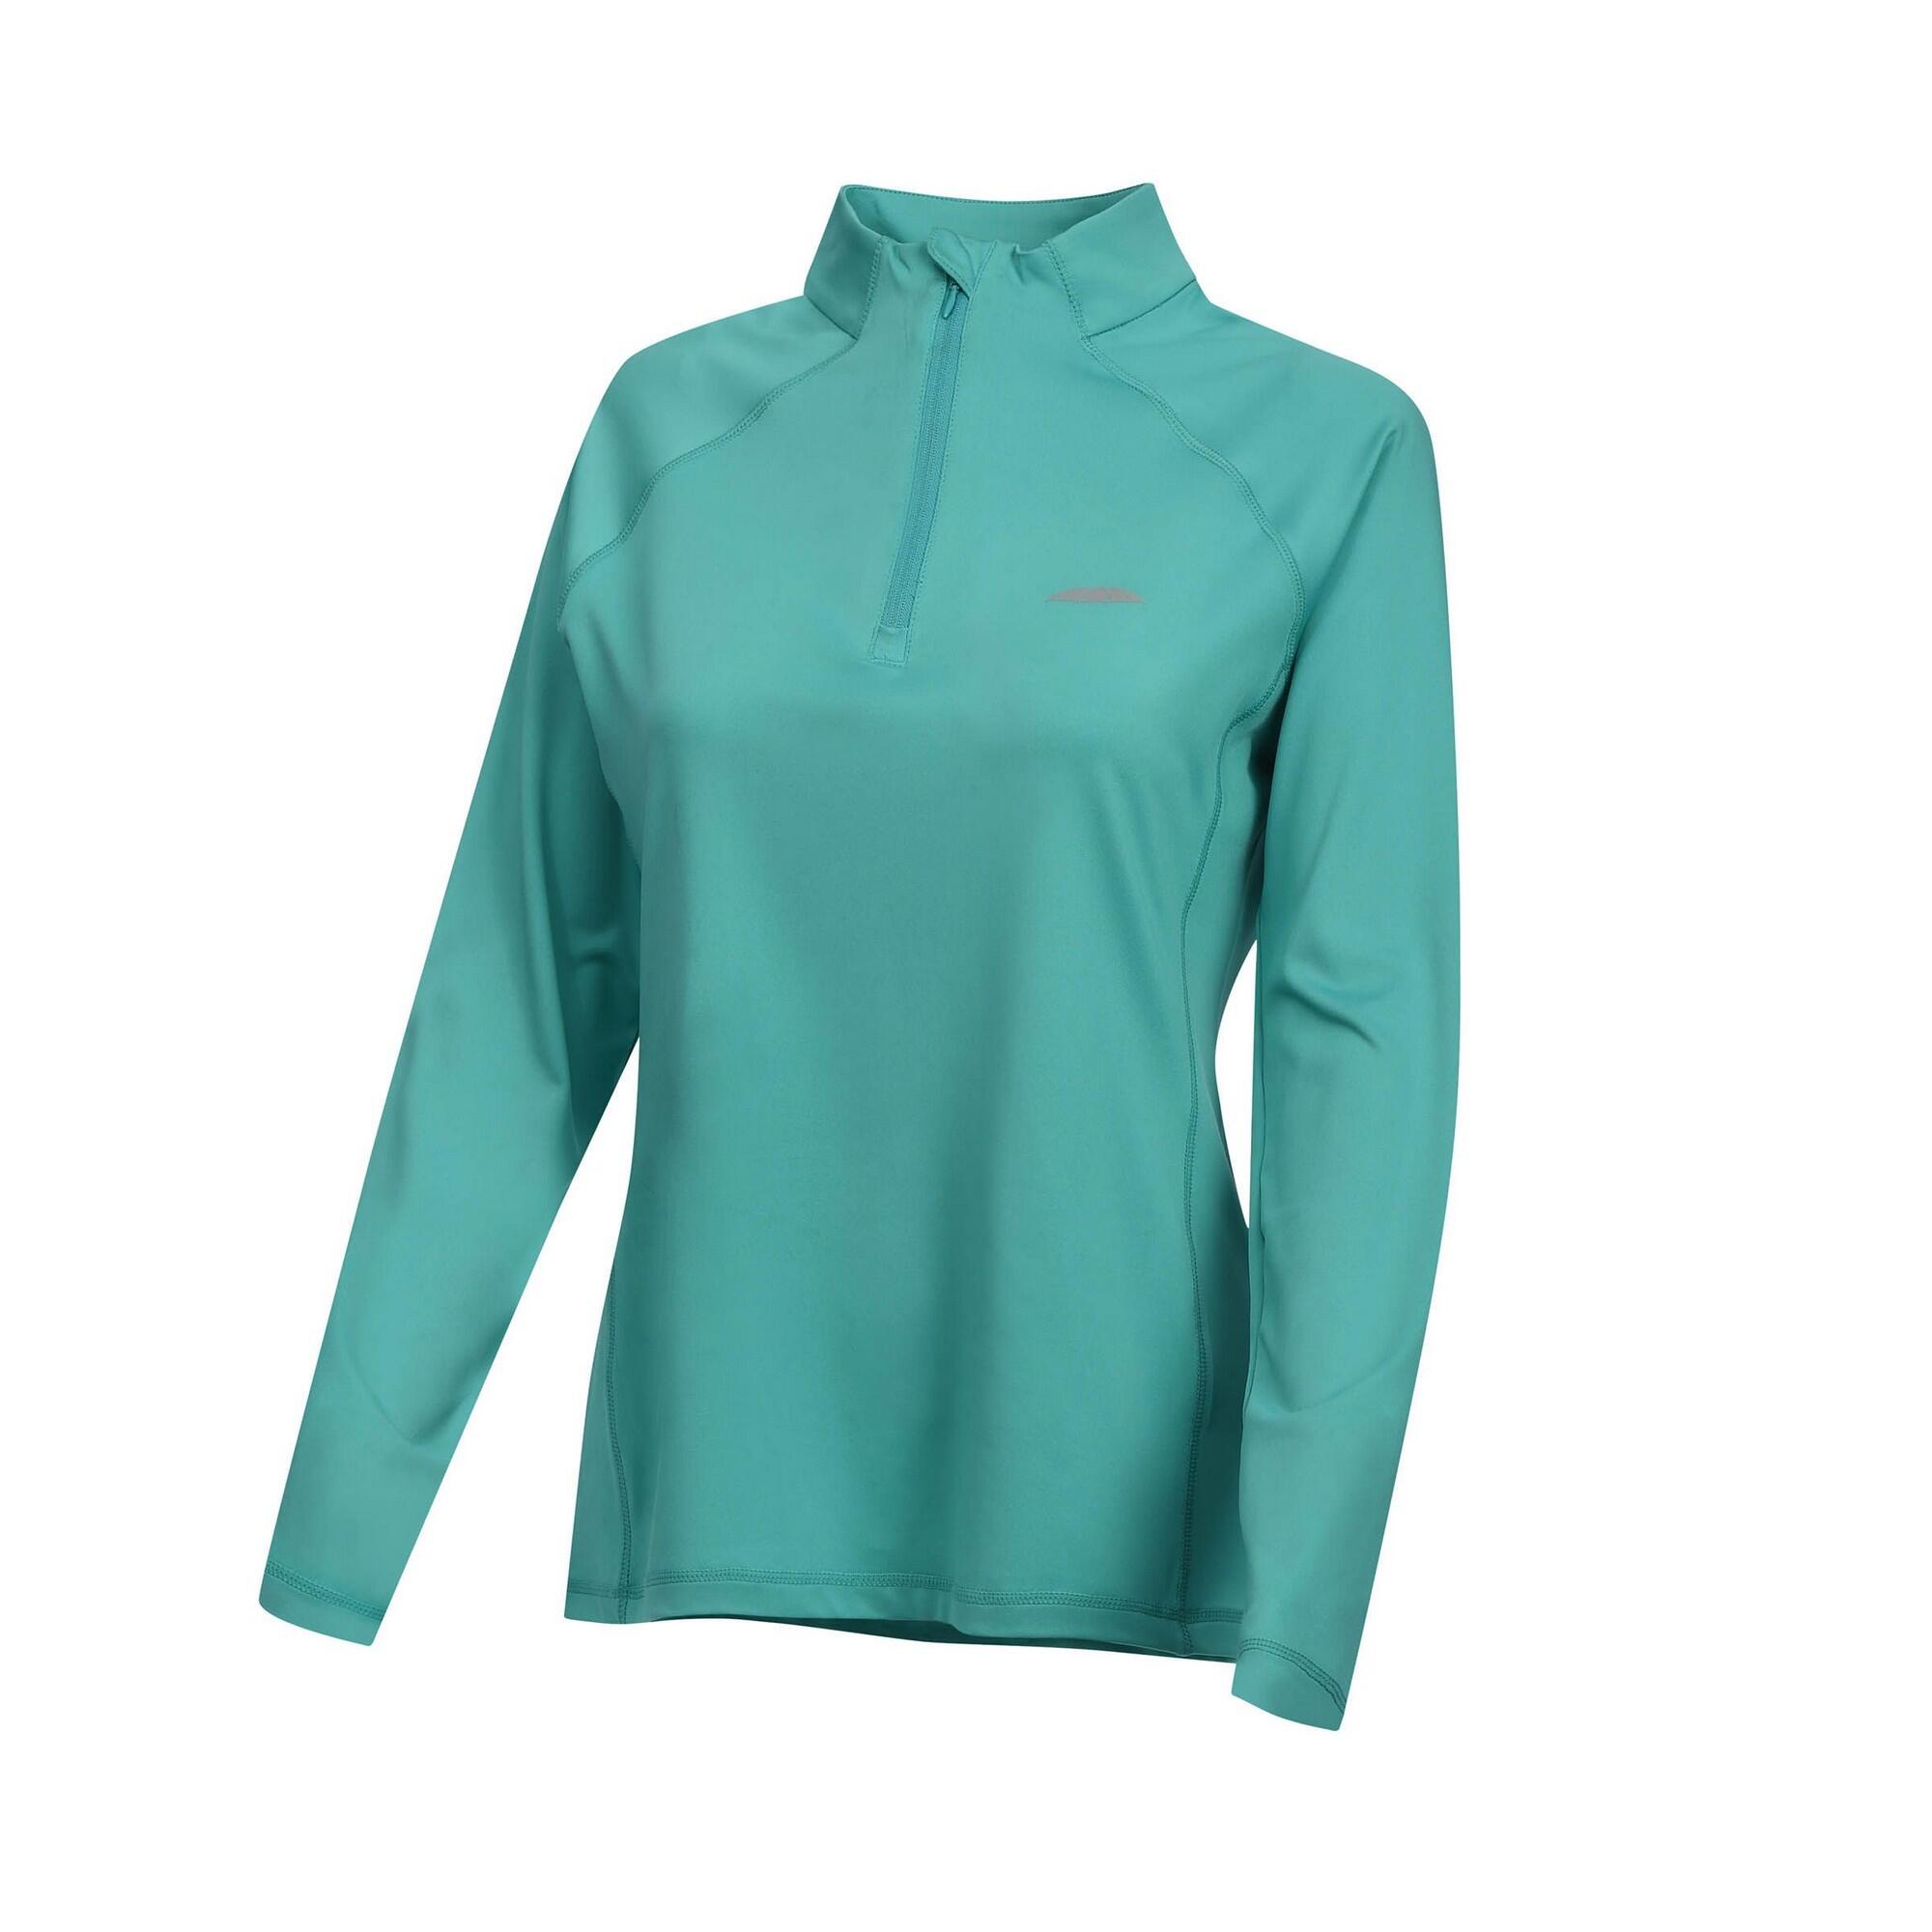 Womens/Ladies Prime LongSleeved Base Layer Top (Turquoise) 1/3